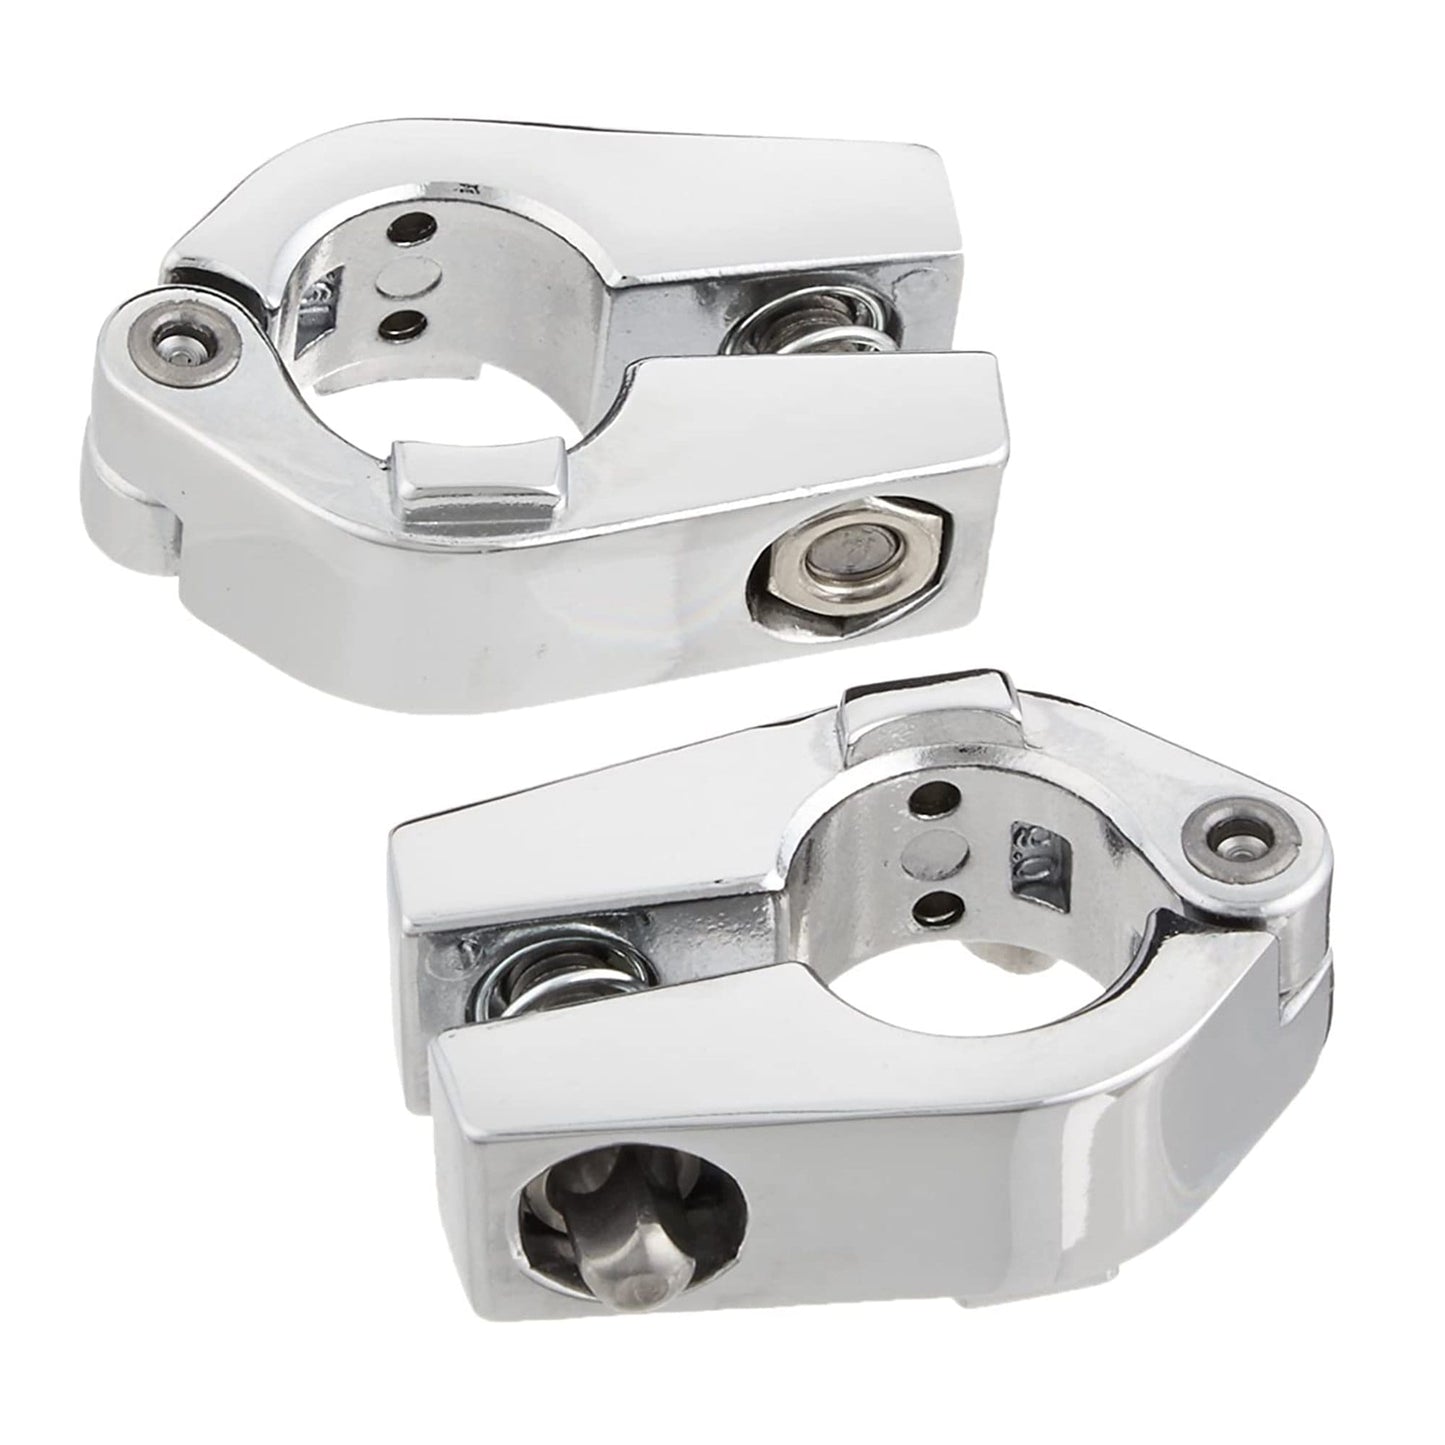 DW 3/4" Hinged Memory Lock (4 Pack Bundle) Drums and Percussion / Parts and Accessories / Drum Parts